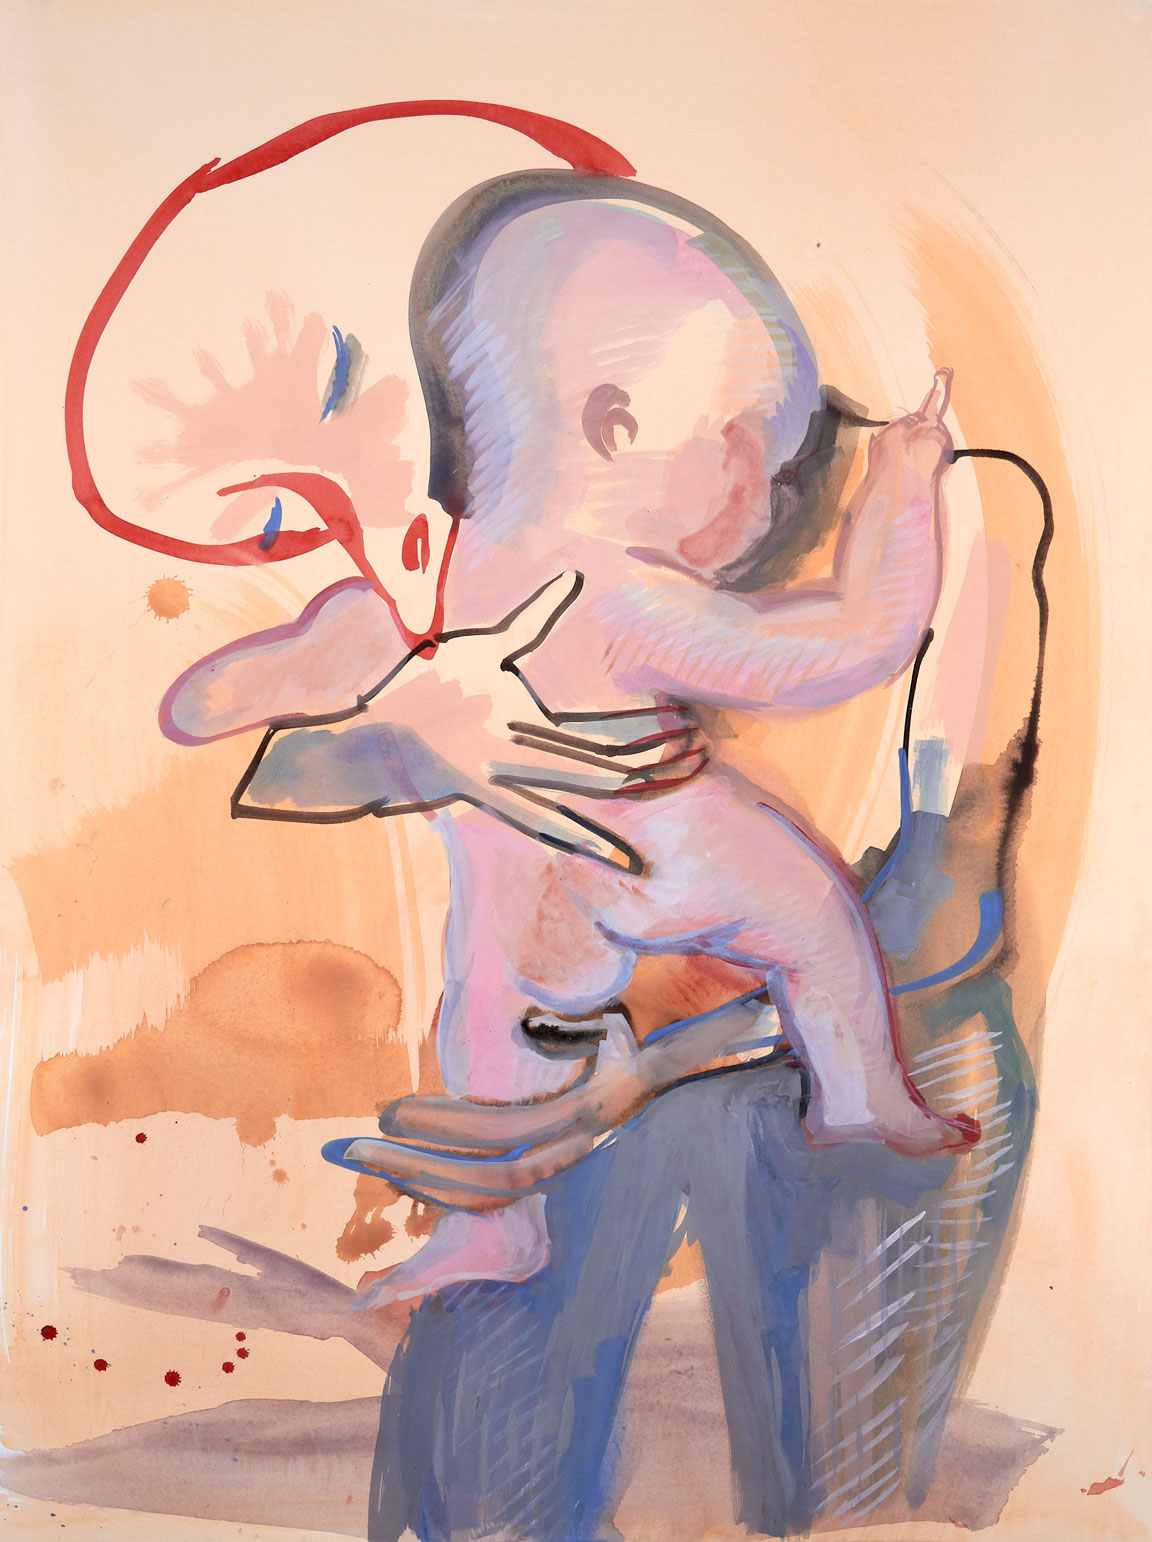 Camille Henrot - Mother Tongue, 2020 - Watercolor on paper / Aquarelle